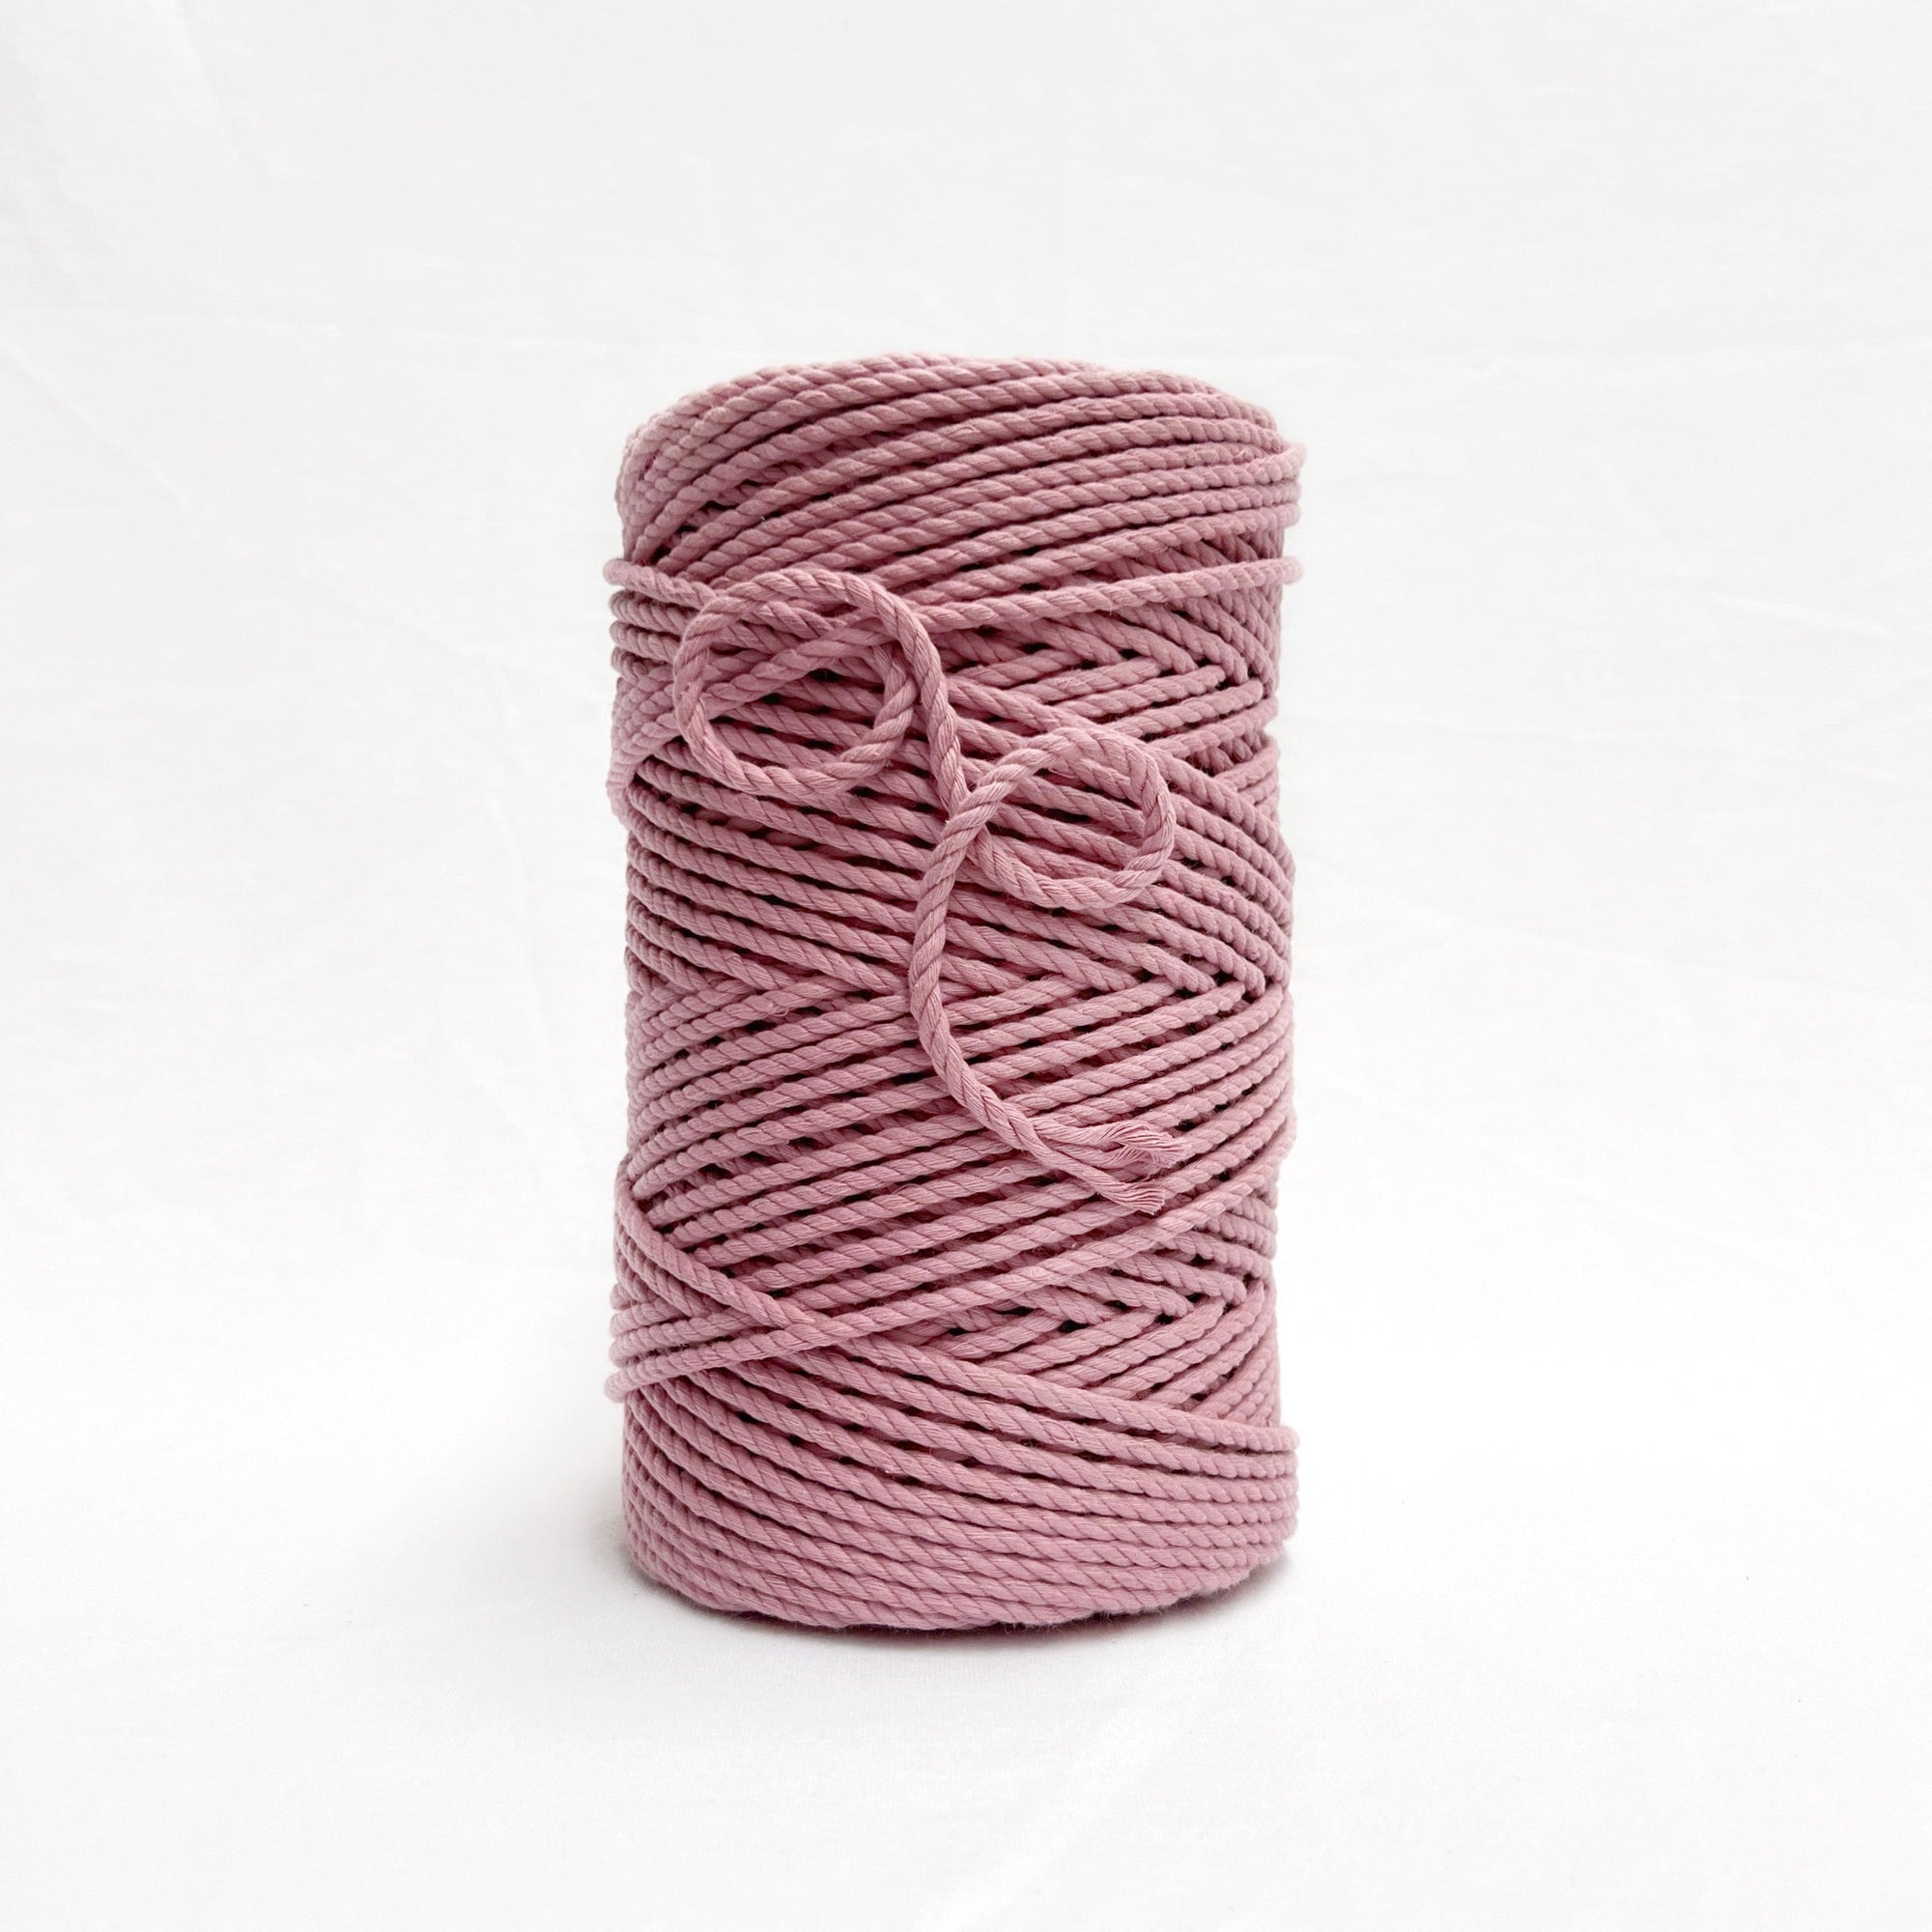 mary maker studio 4mm recycled cotton macrame rope in vintage pink colour suitable for macrame workshops beginners and advanced artists